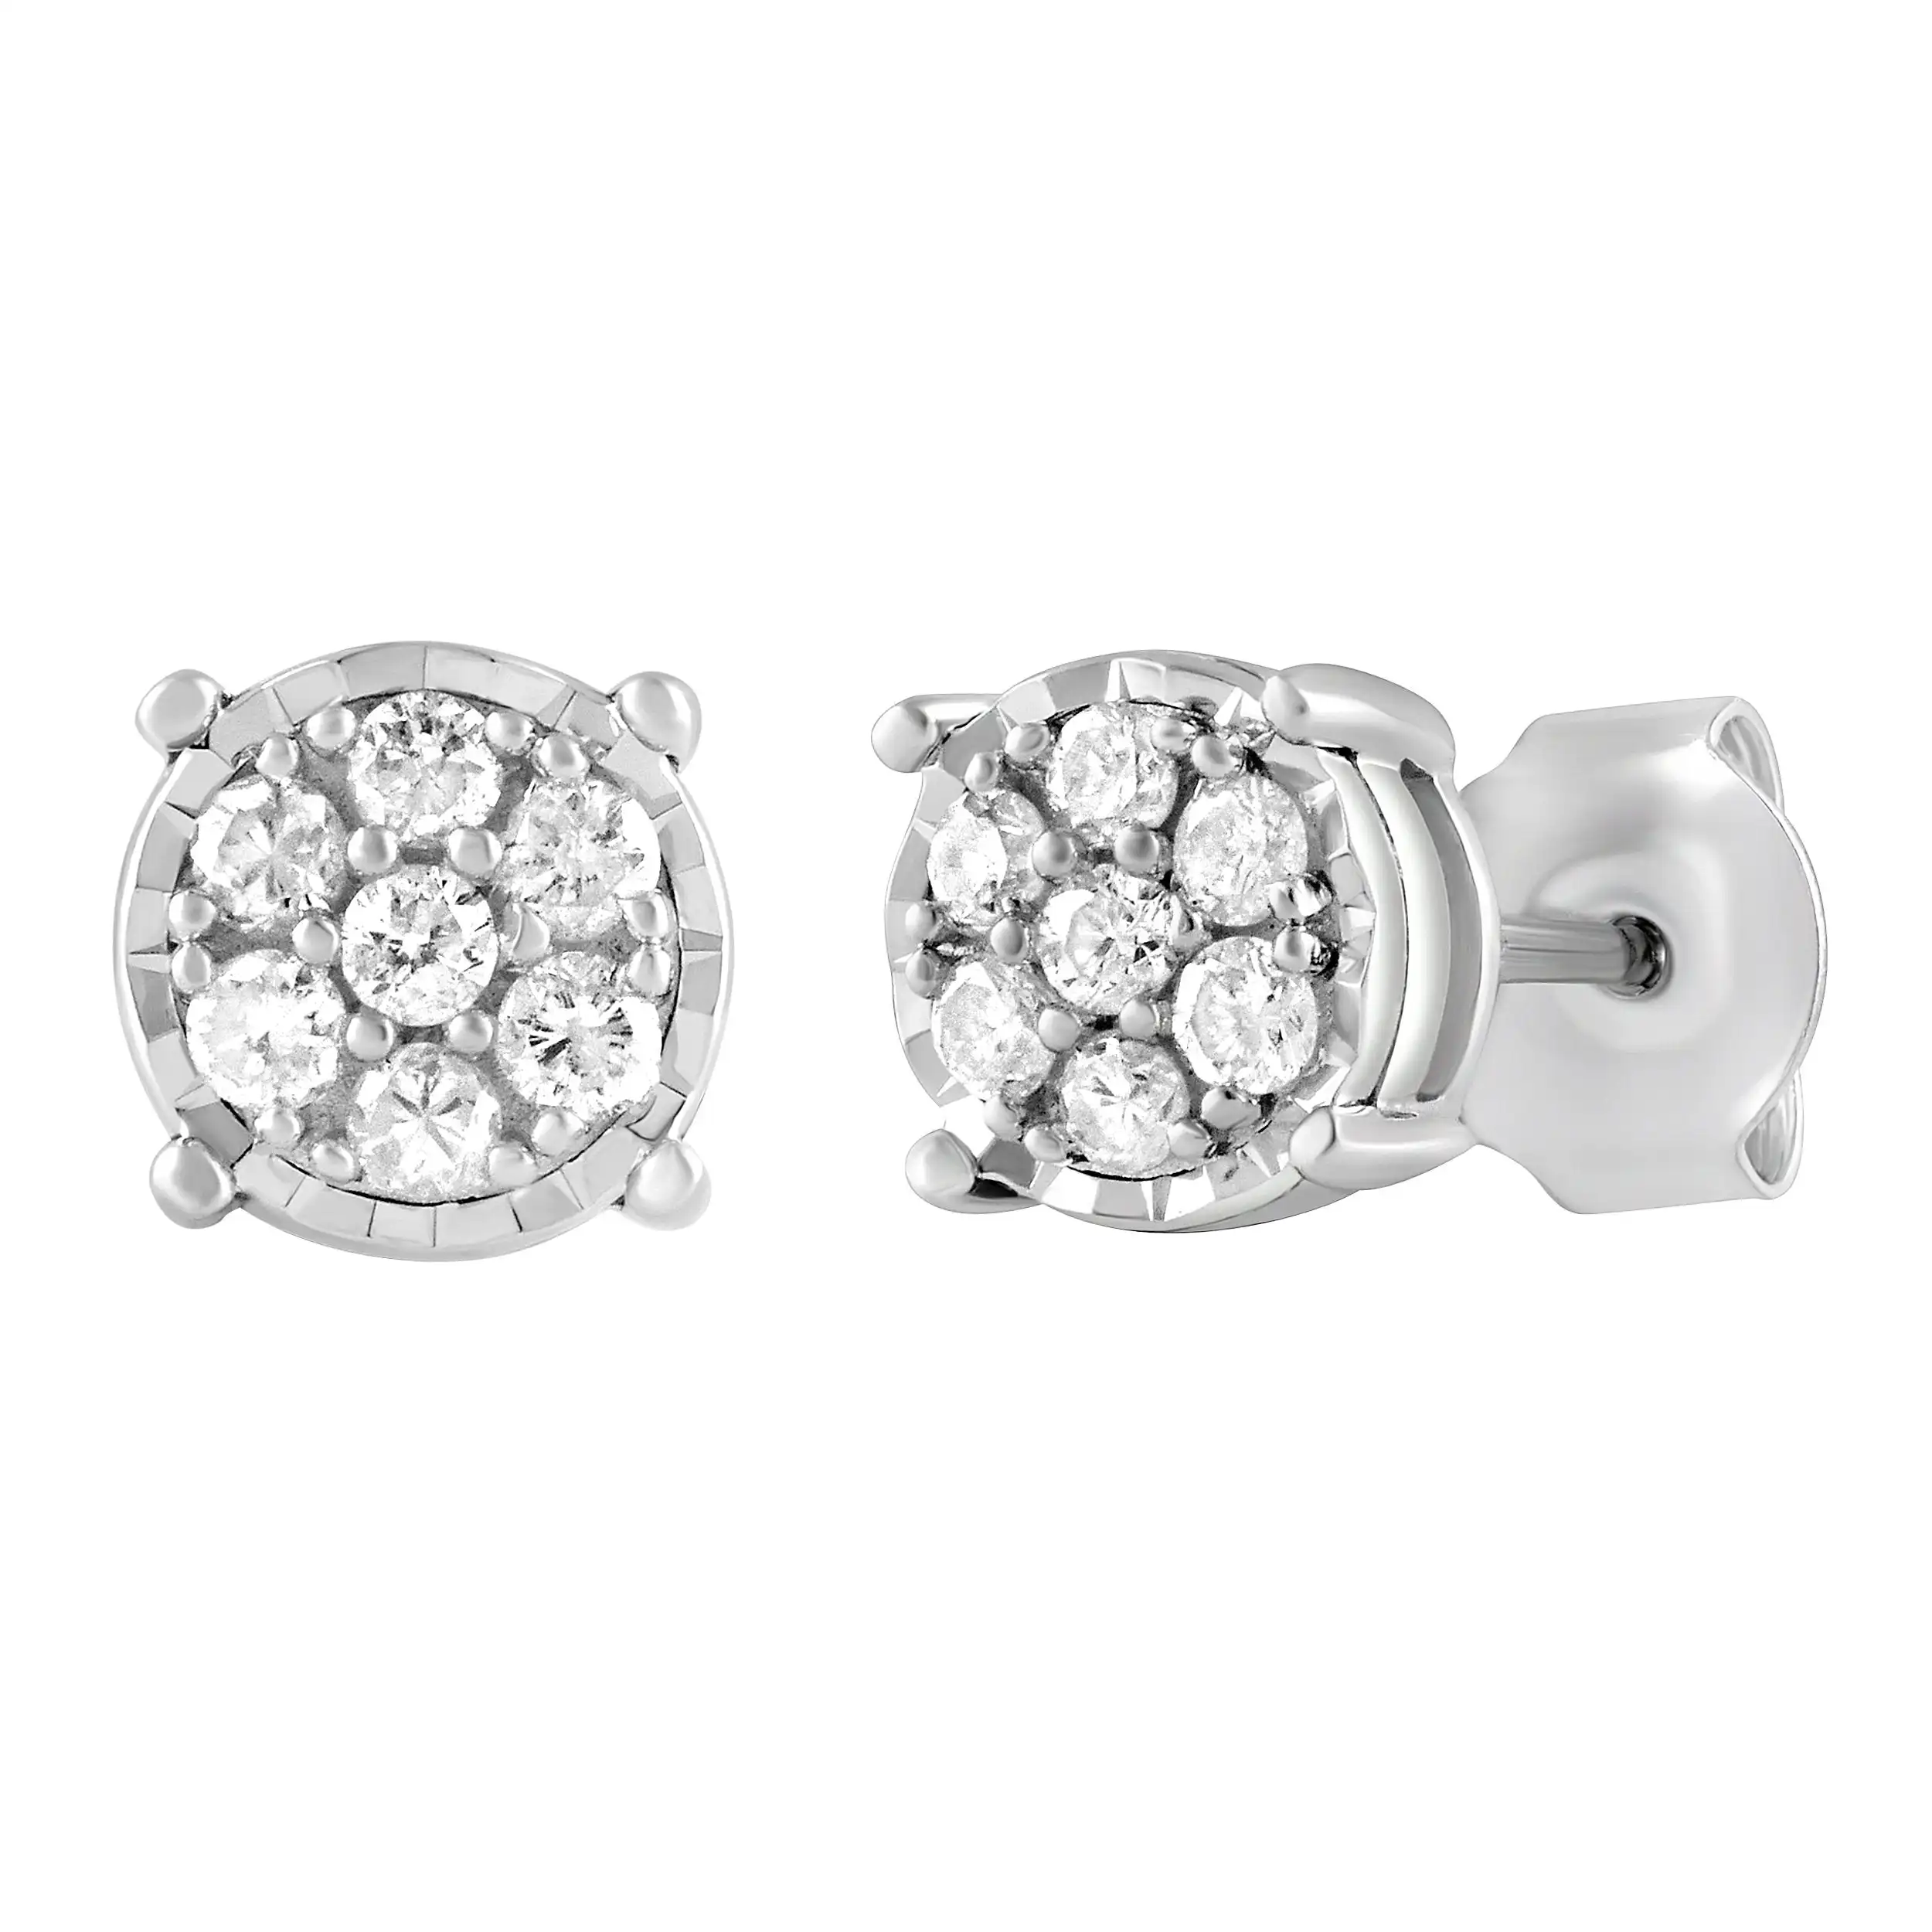 Miracle Halo Composite Earrings with 1/4ct of Diamonds in Sterling Silver